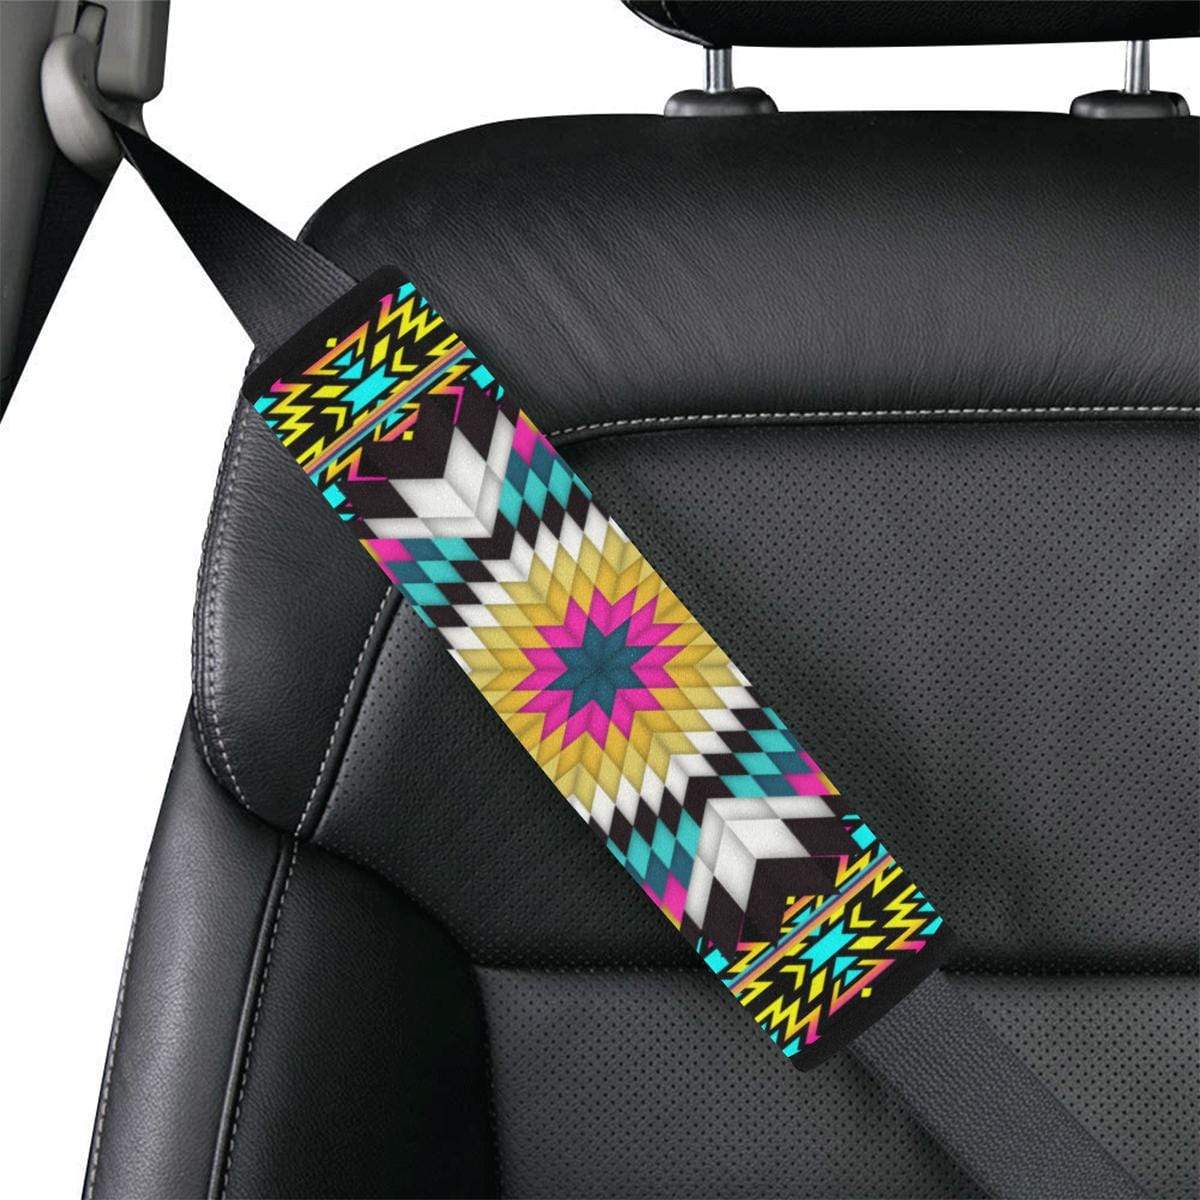 Southern Traditional Car Seat Belt Cover 7''x12.6'' Car Seat Belt Cover 7''x12.6'' e-joyer 